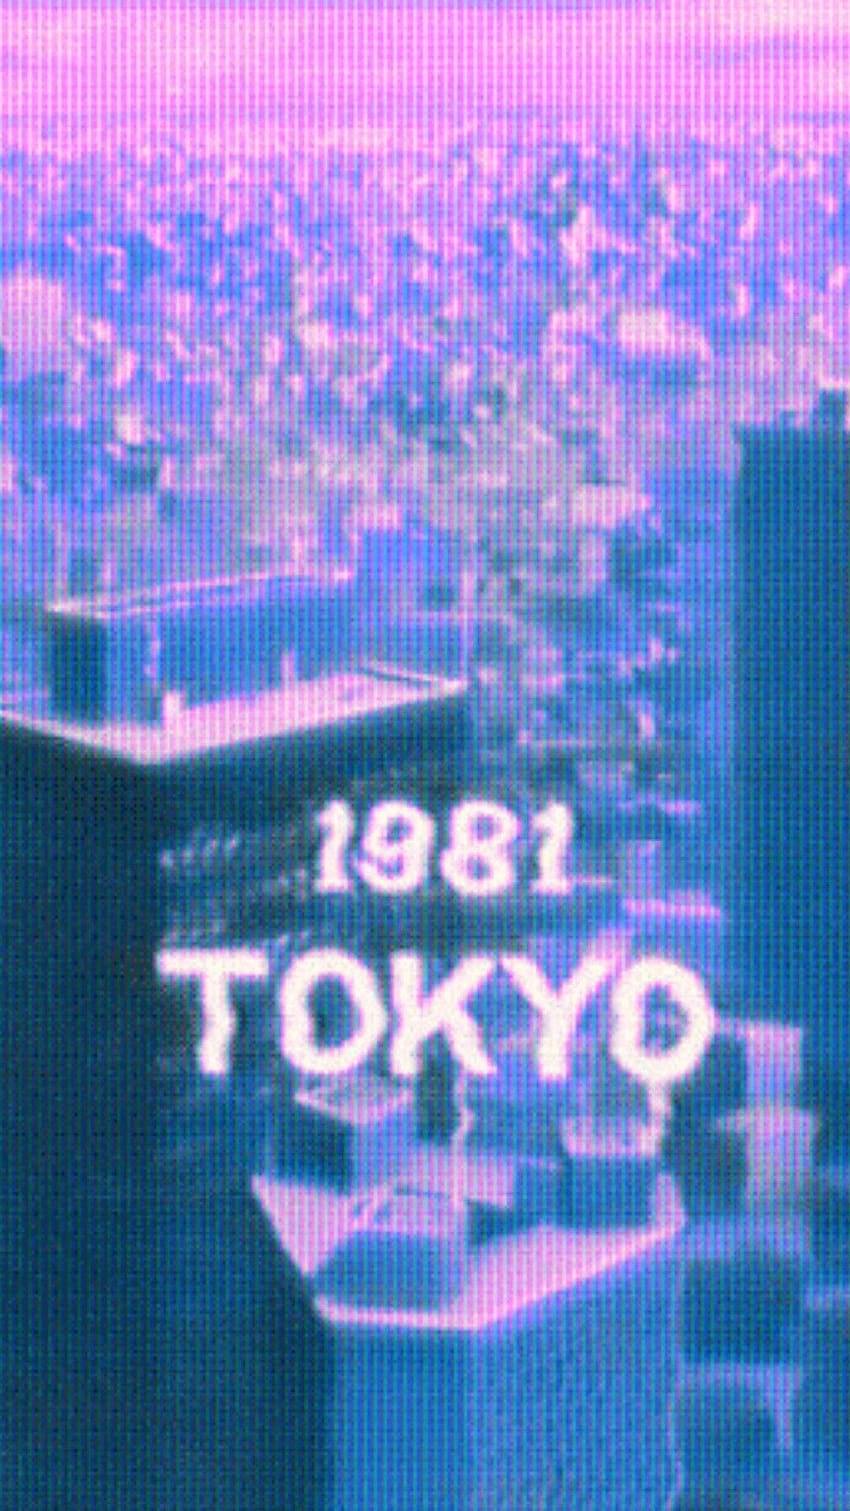 Tokyo Aesthetic posted by Christopher Johnson, aesthetic japanese purple HD phone wallpaper